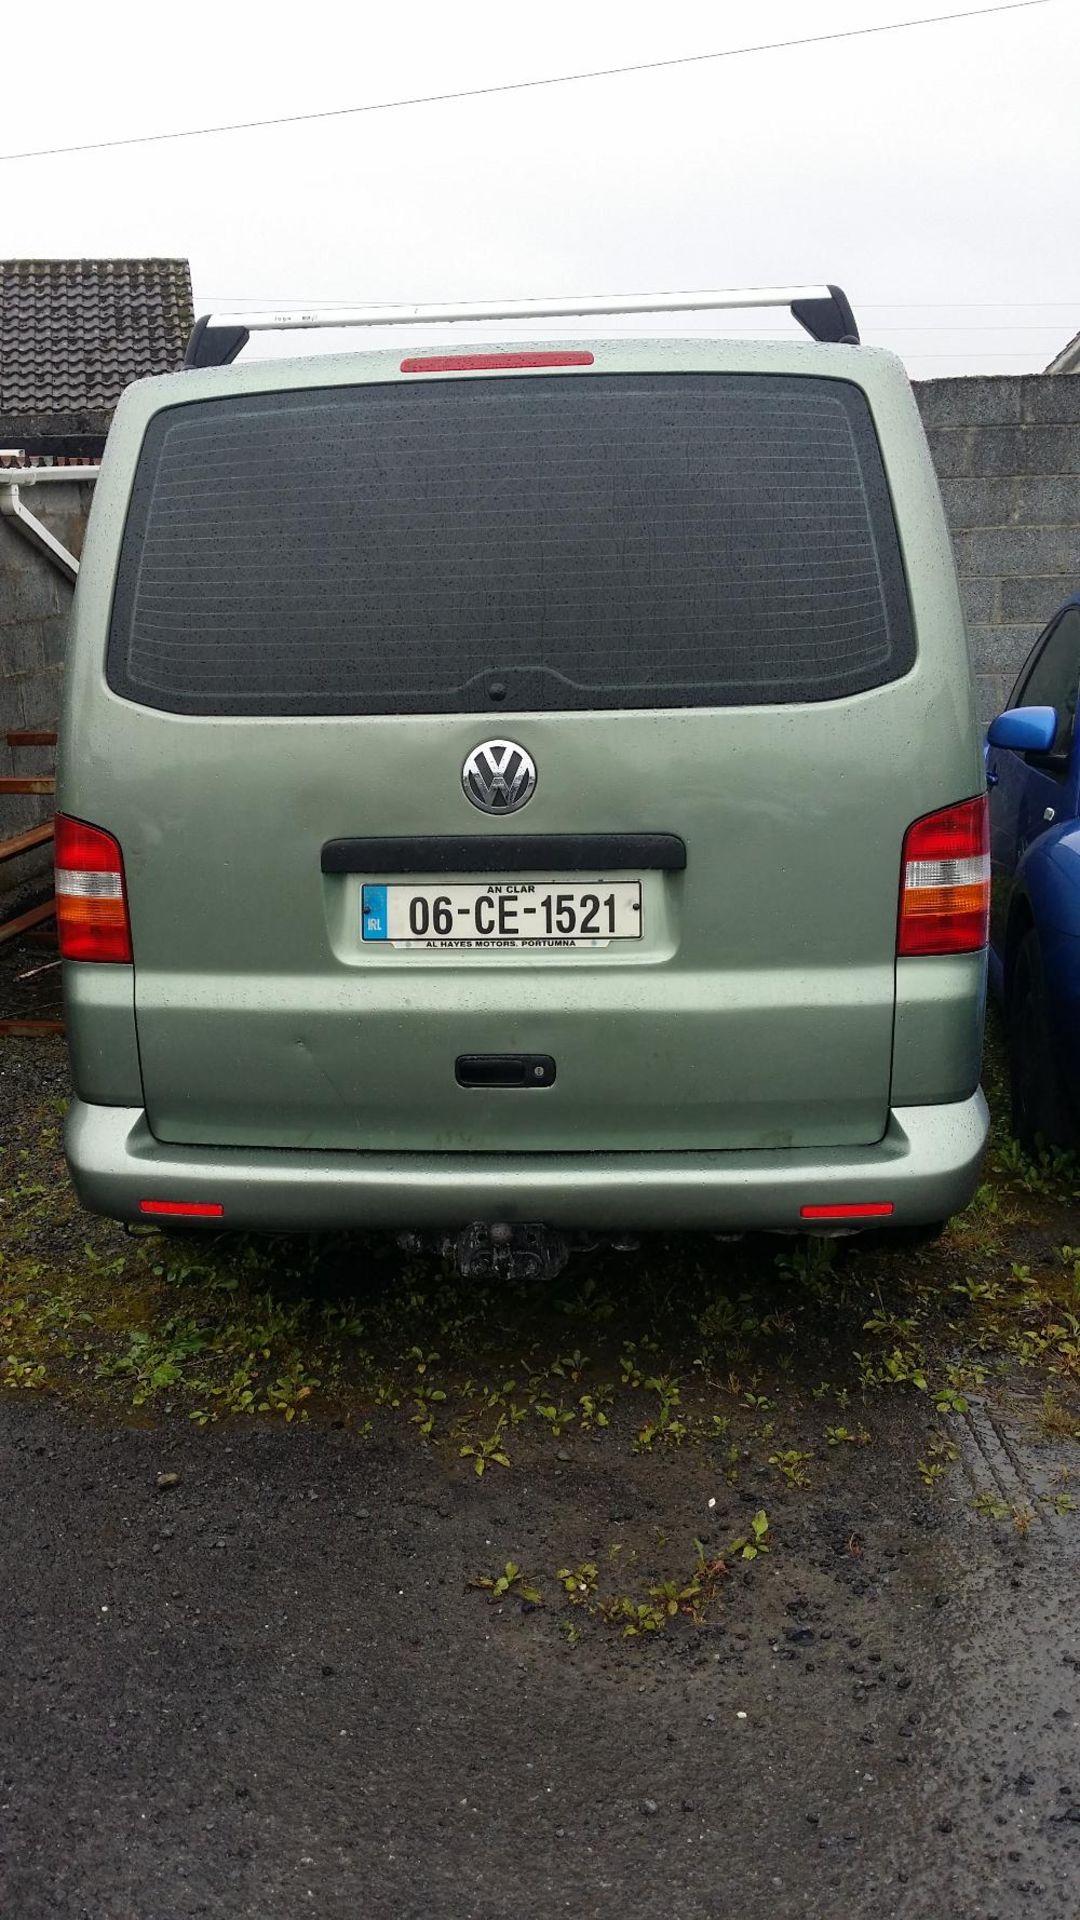 VW Transporter 2.5 TDI LWD with 4no. New Tyres, Oil Cooler, Bushings Fully Serviced. Irish Reg. - Image 3 of 3